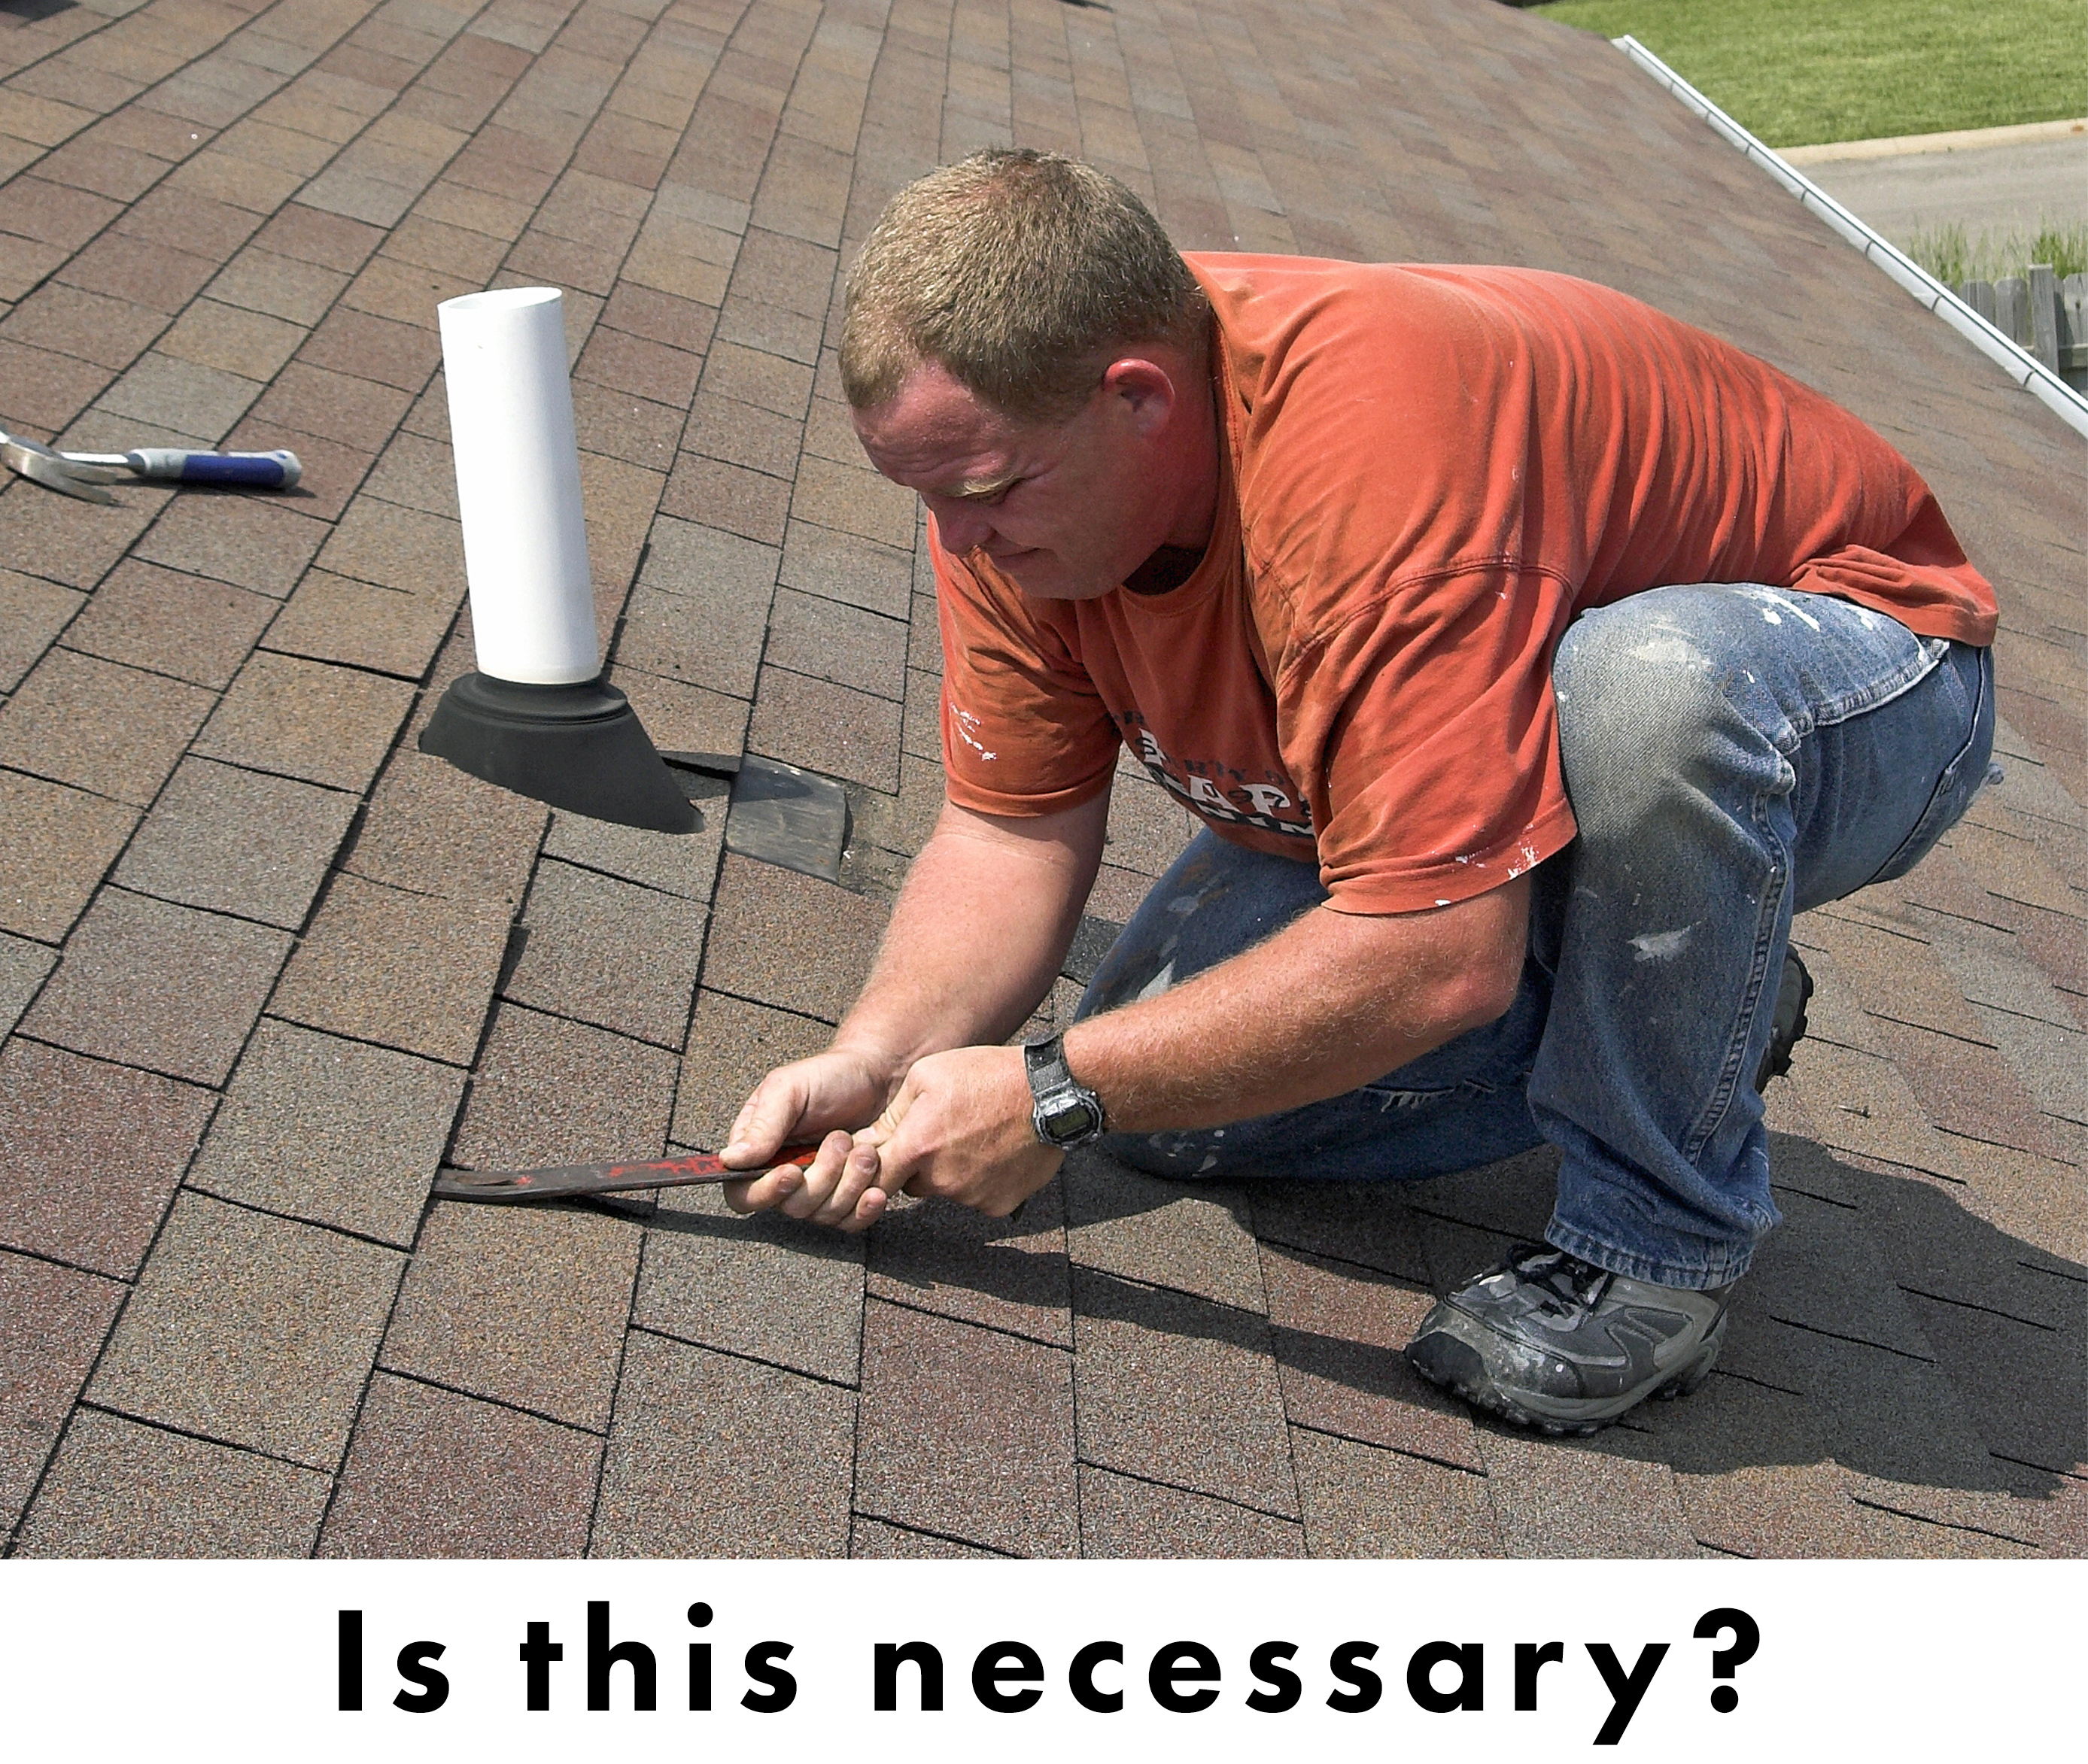 lifting shingles sucks, so is it even necessary or is there a better way? yes.